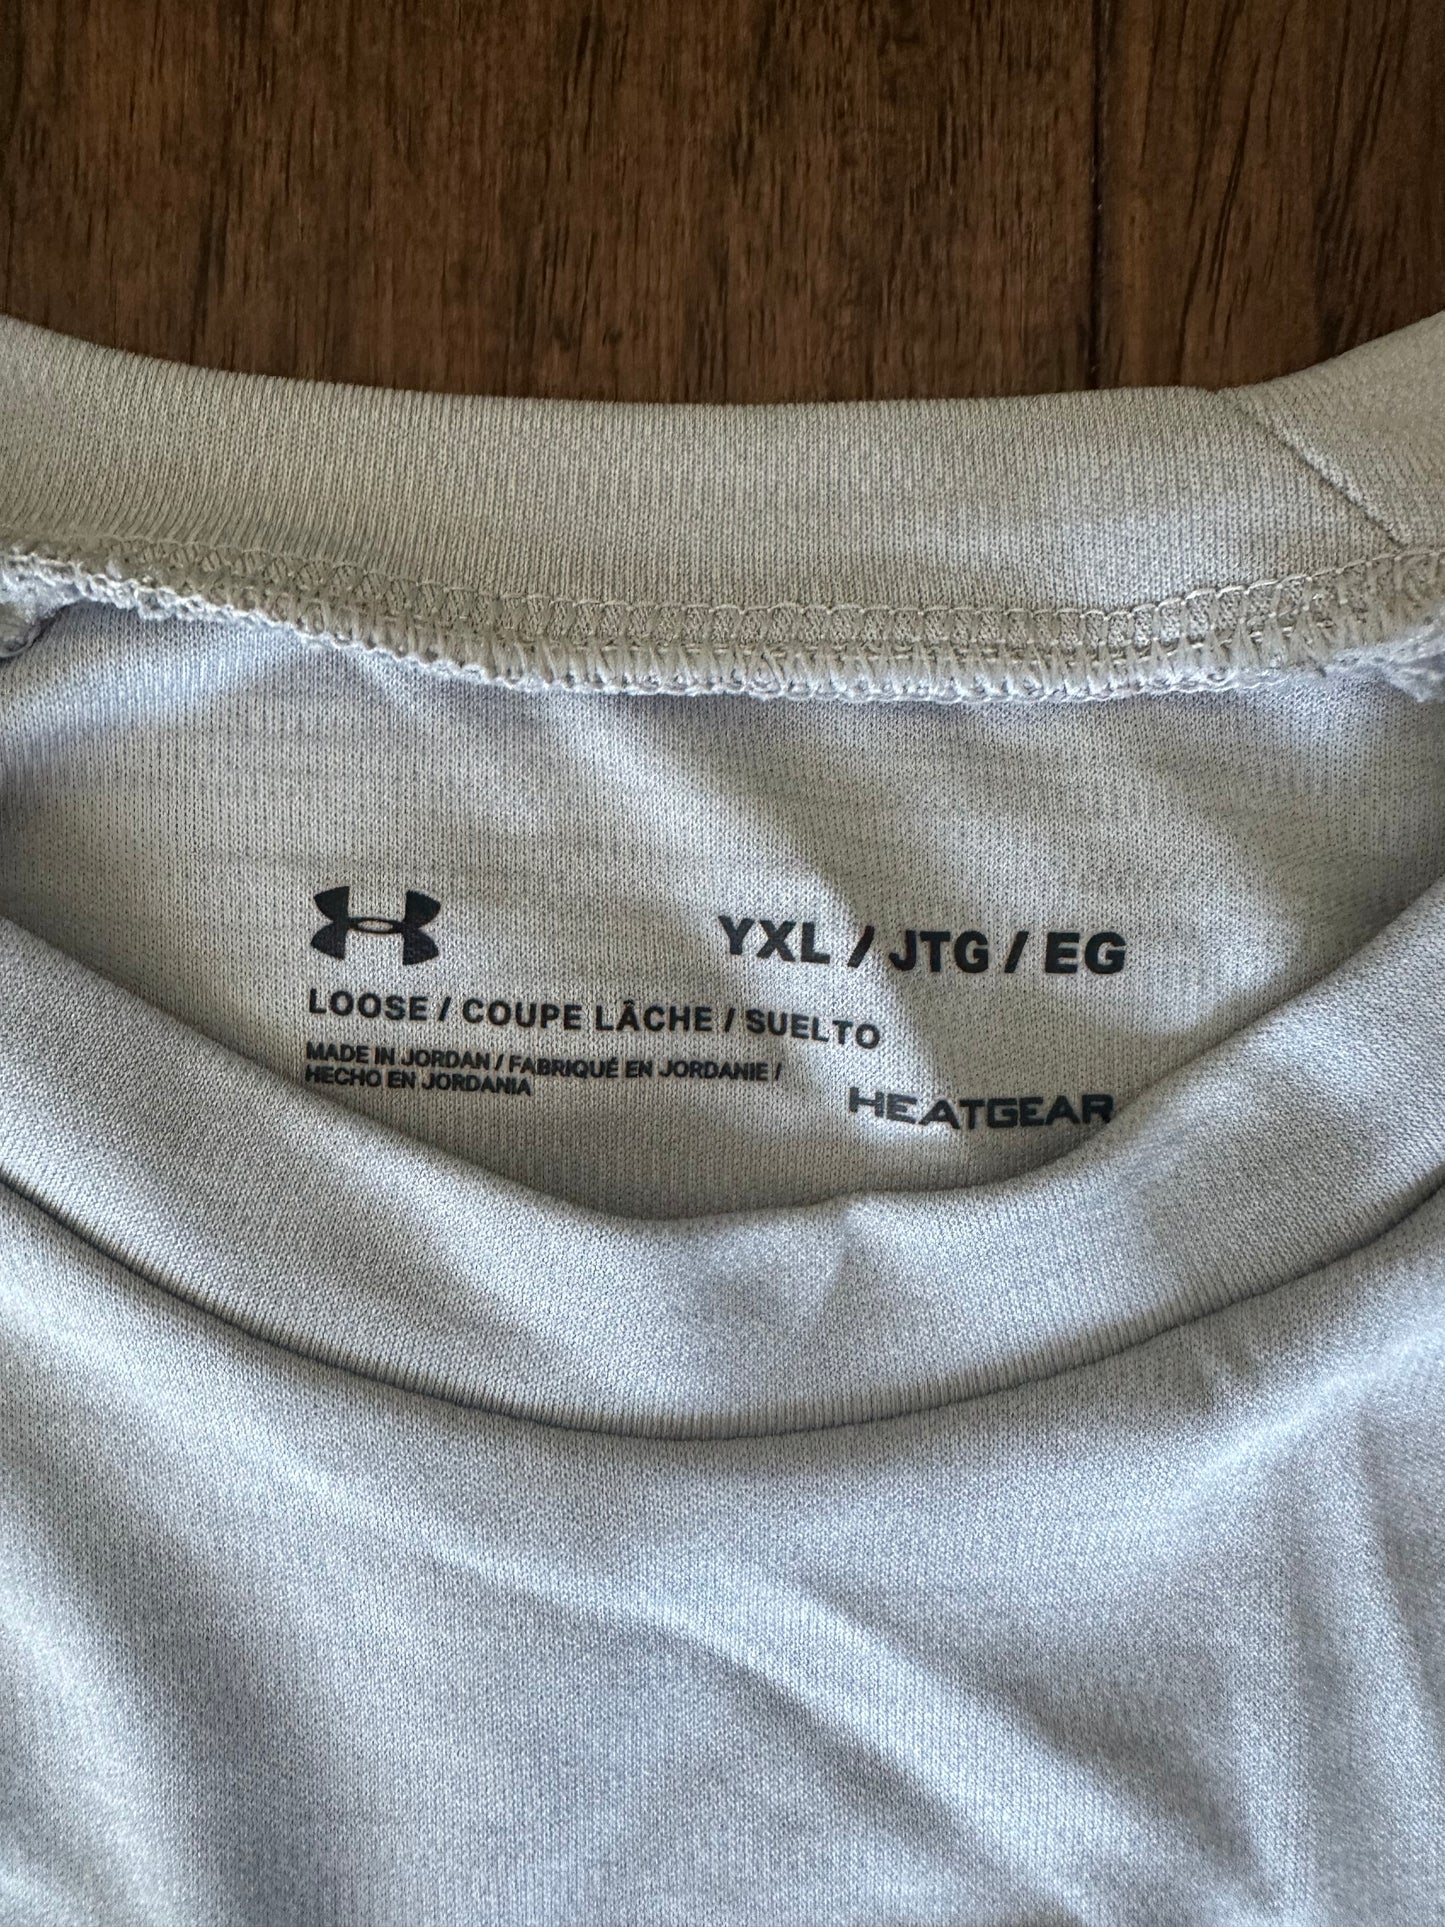 Under Armour - Youth XL